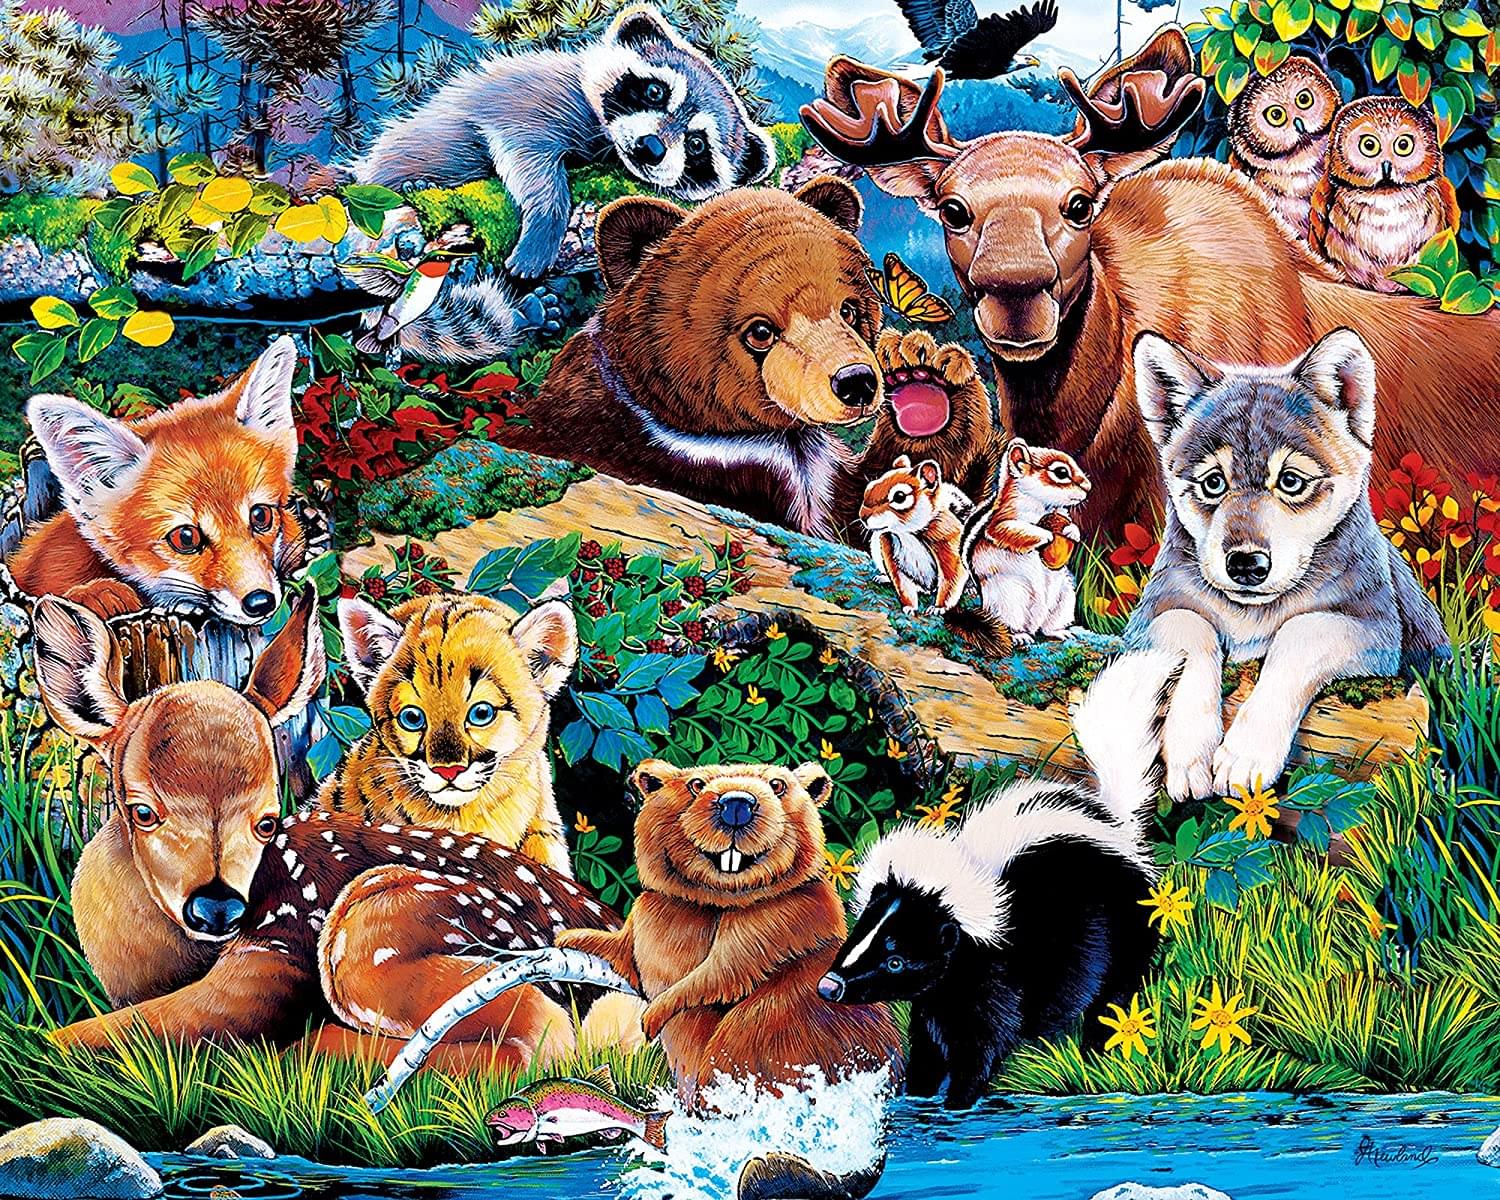 World of Animals 100 Piece Jigsaw Puzzle 4-Pack